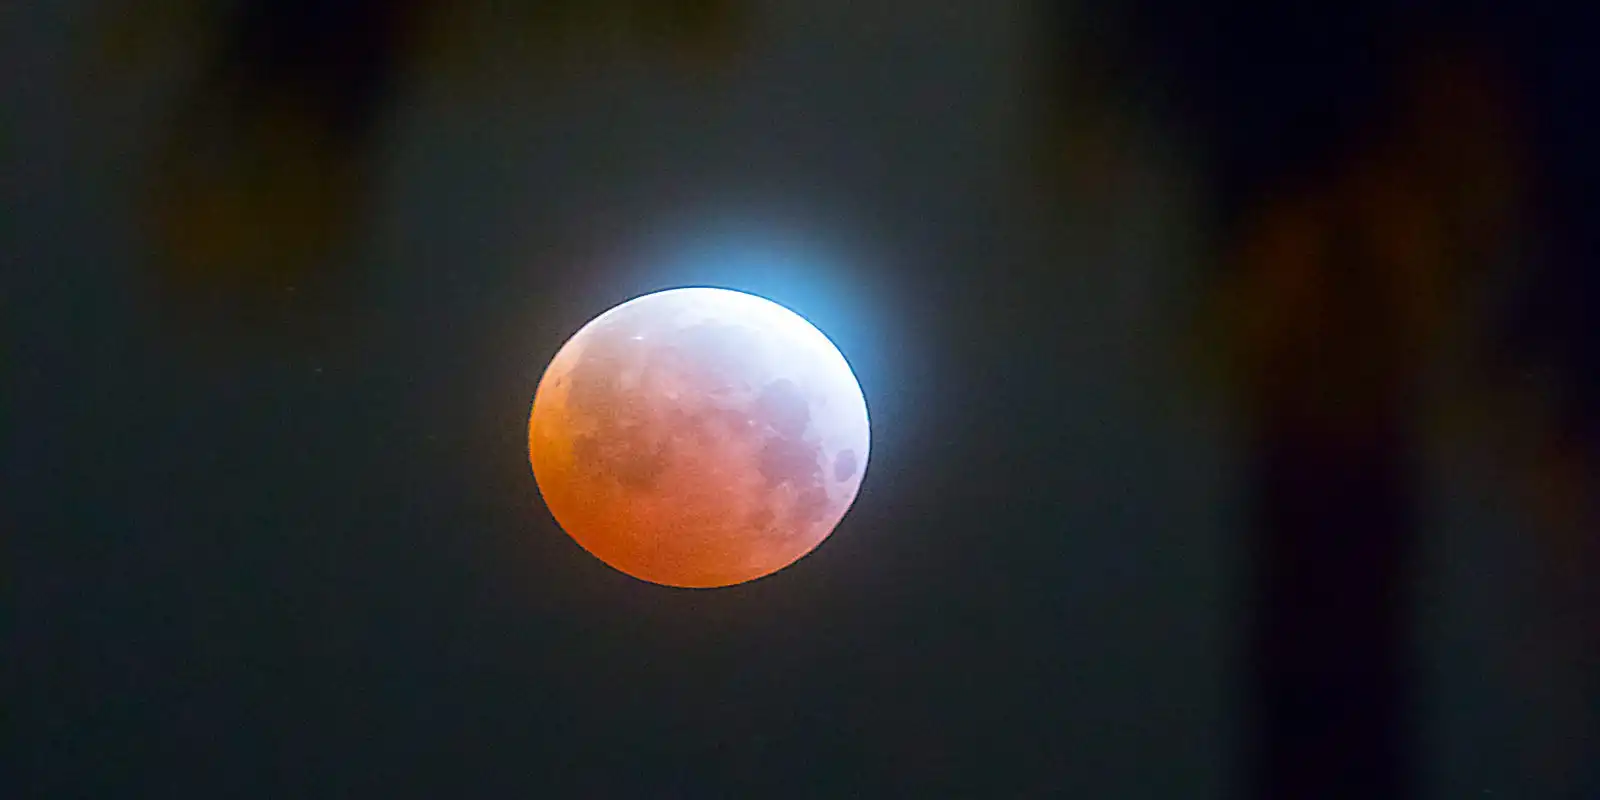 Next Lunar Eclipse: Upcoming Full and Partial Eclipses in Arizona